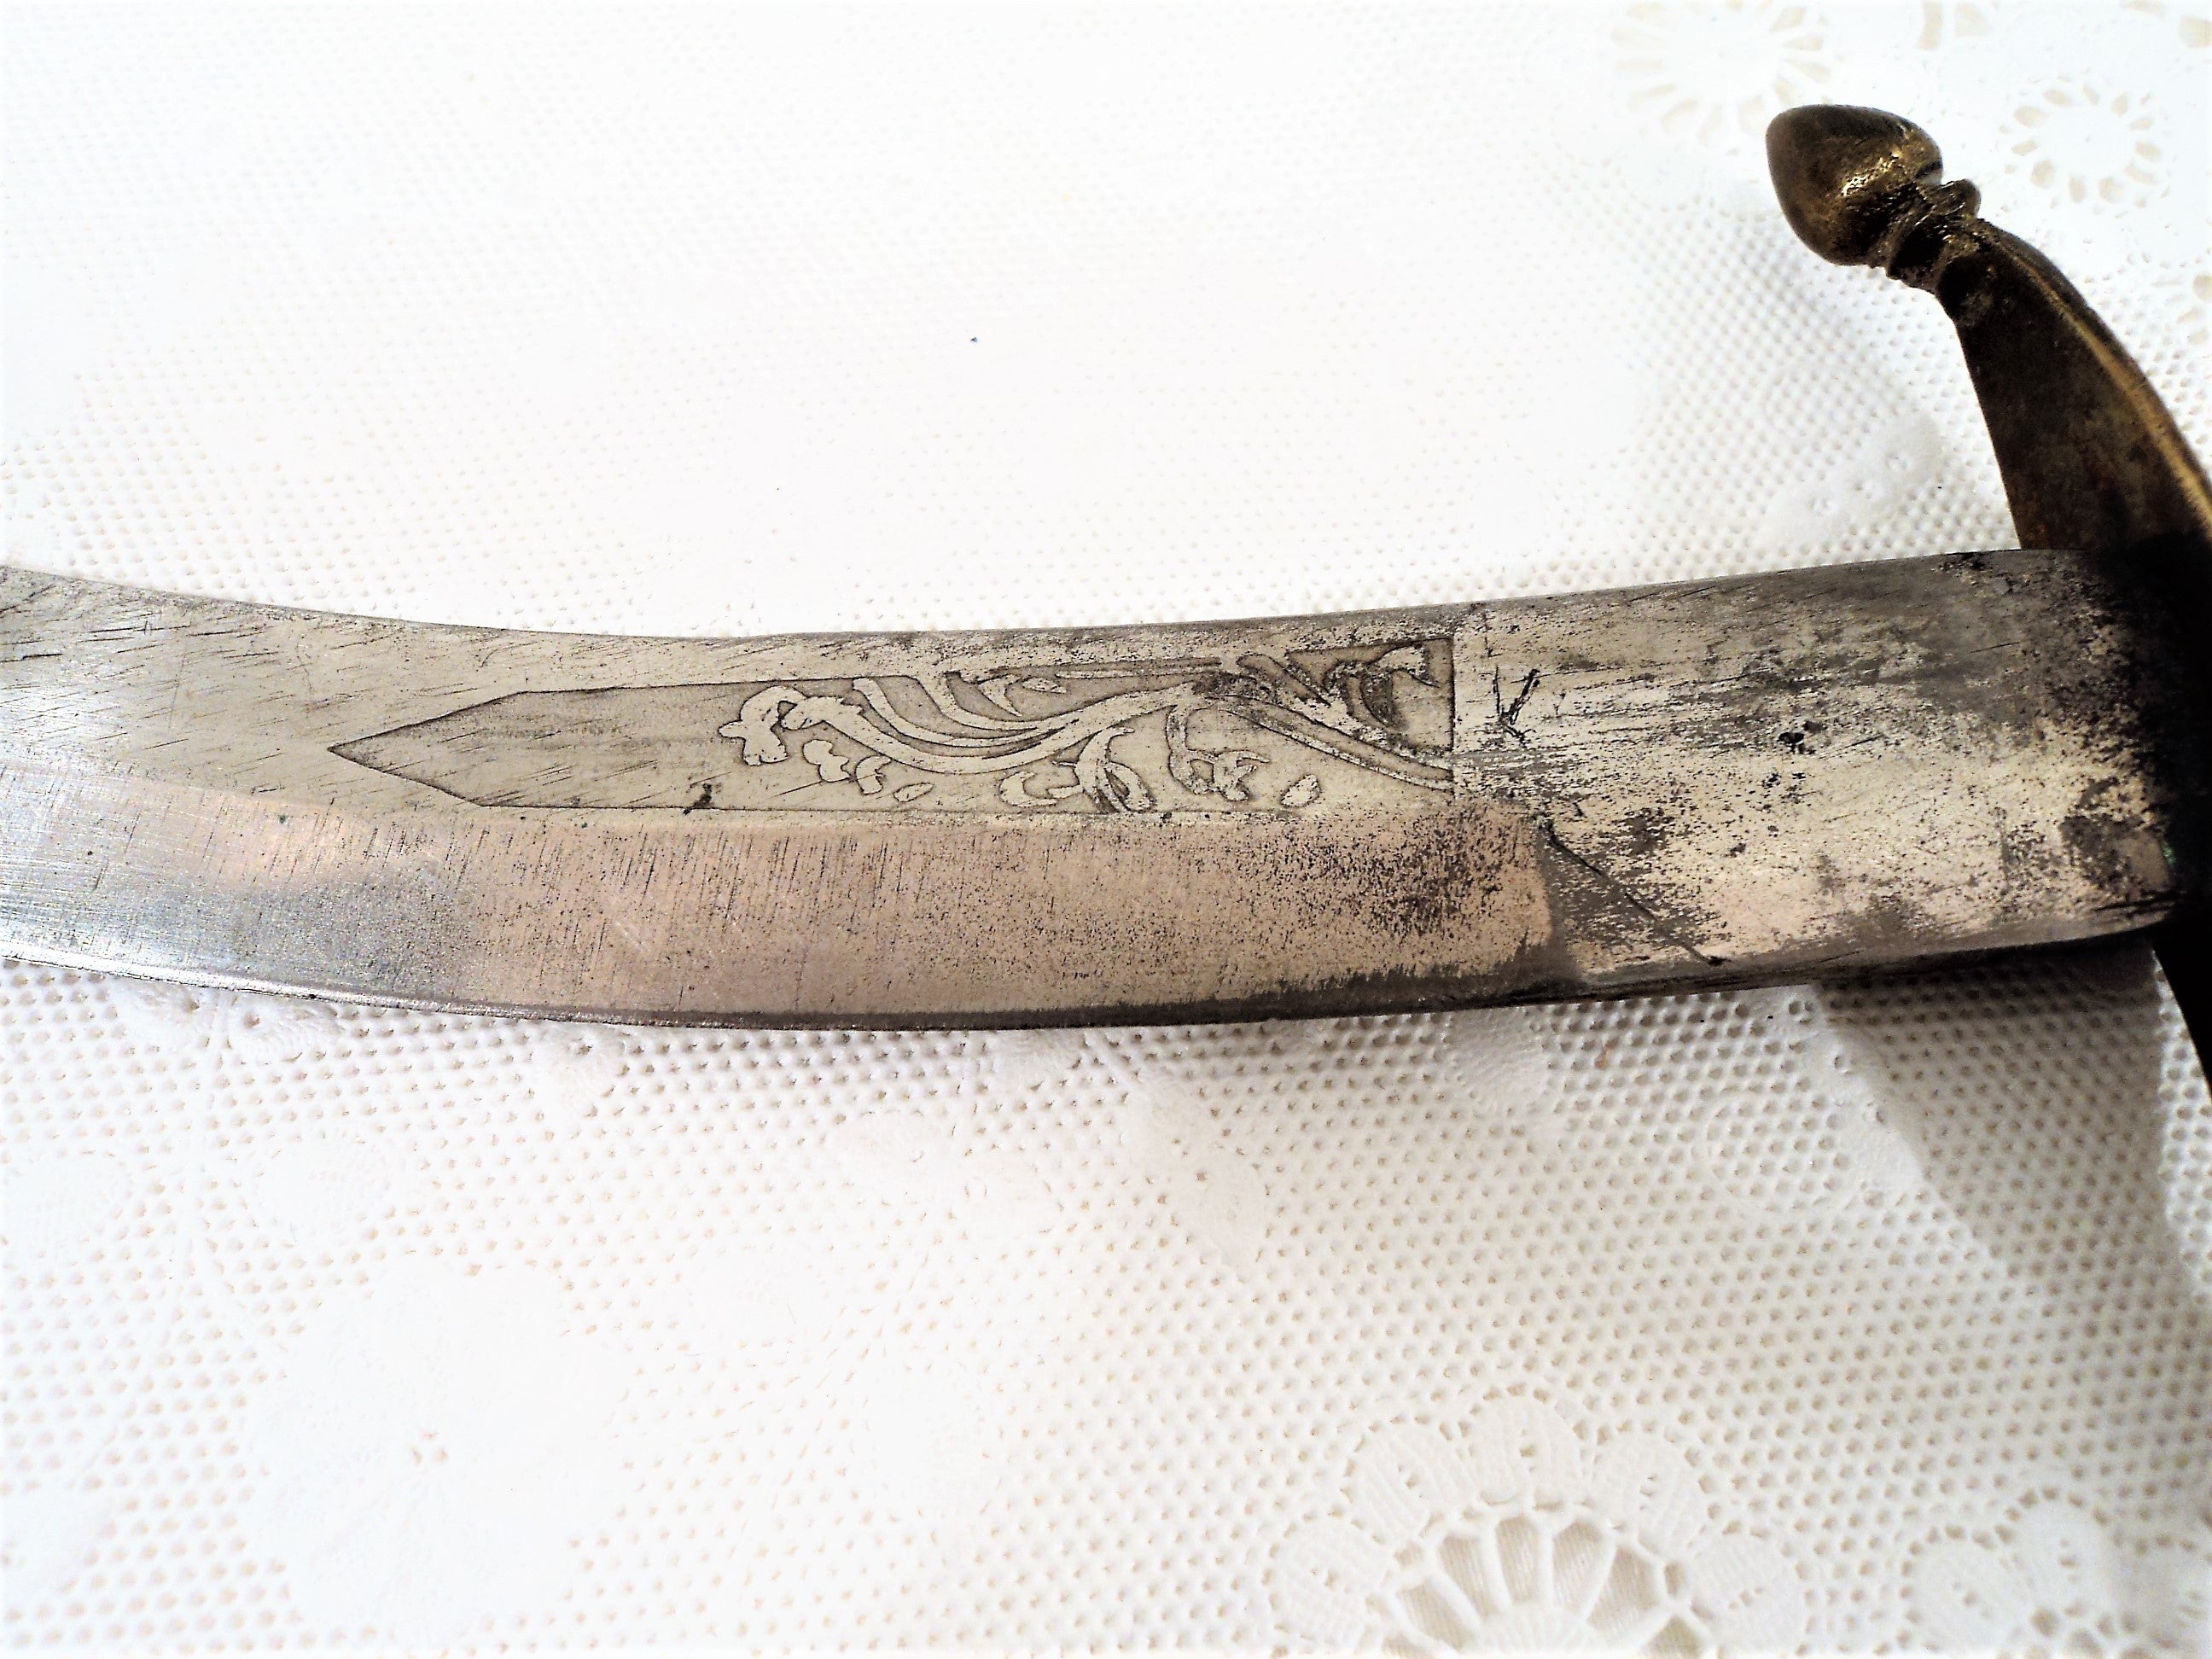 Antique Persian Dagger with Leather Sheath